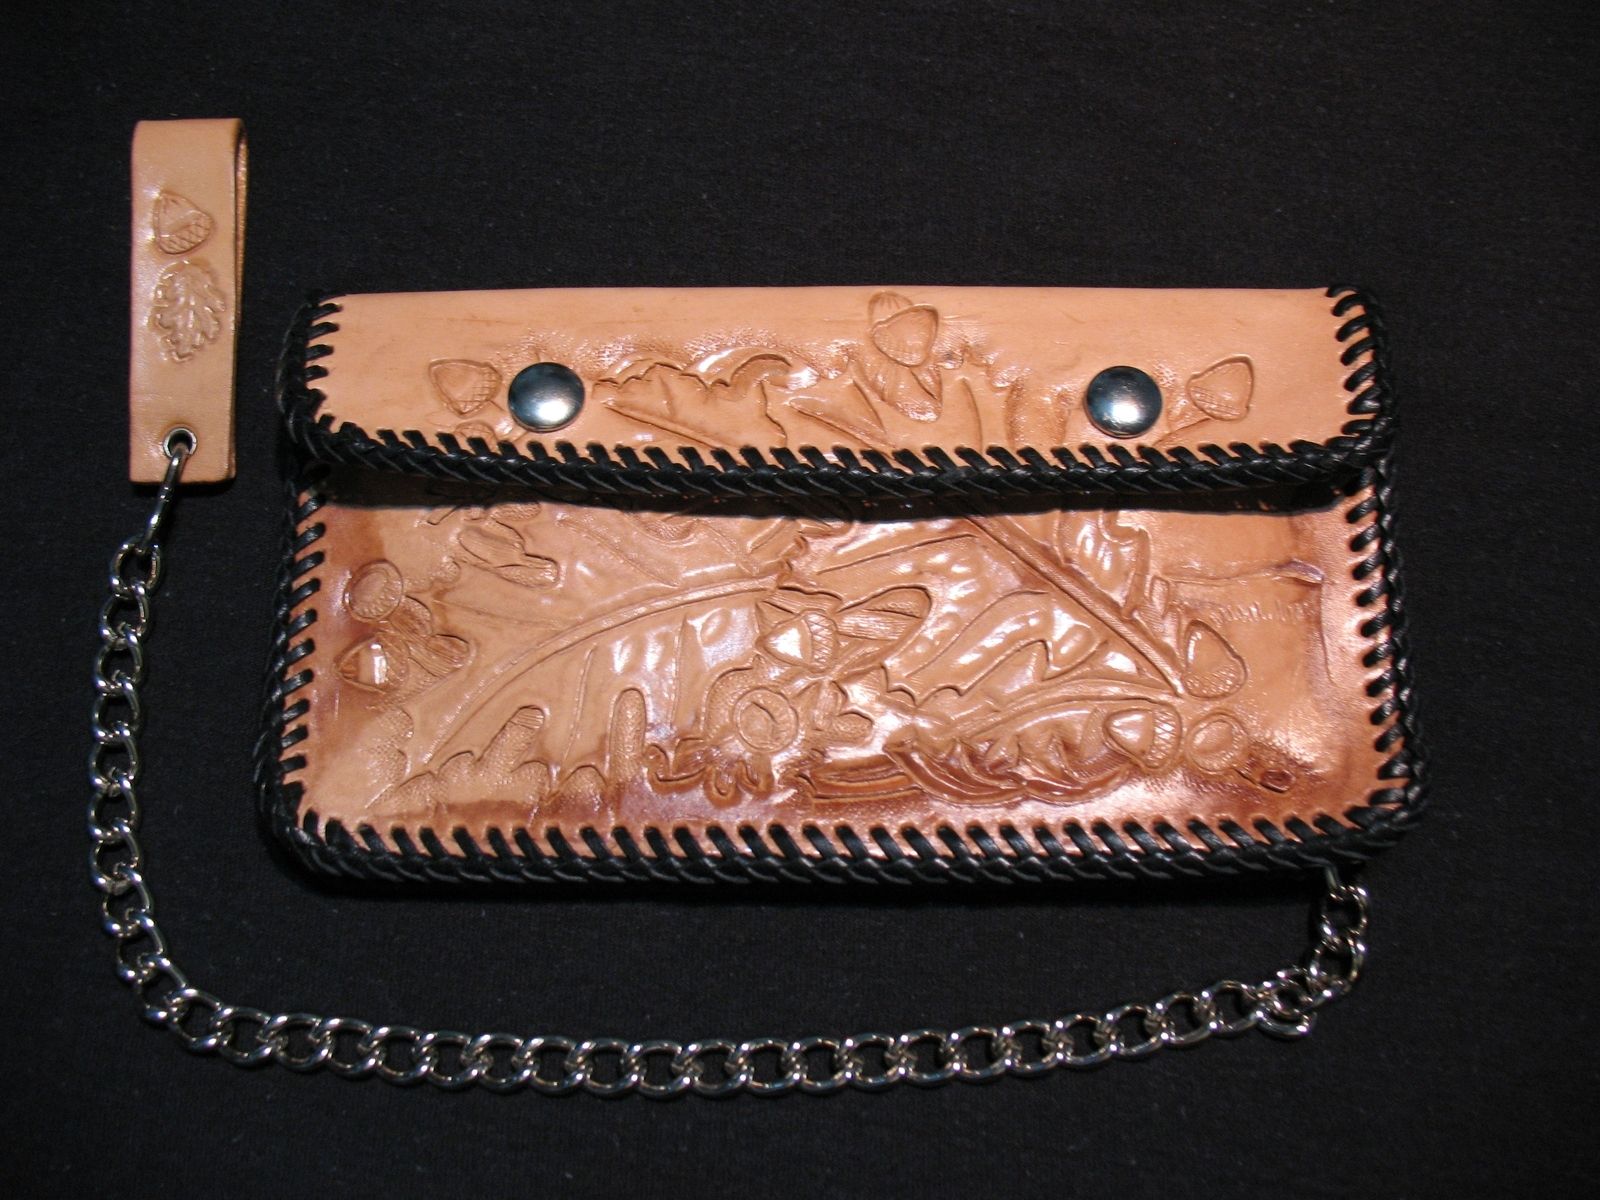 Hand Made Carved Leather Biker Wallet by Perfection In Reflections, Inc. | www.bagssaleusa.com